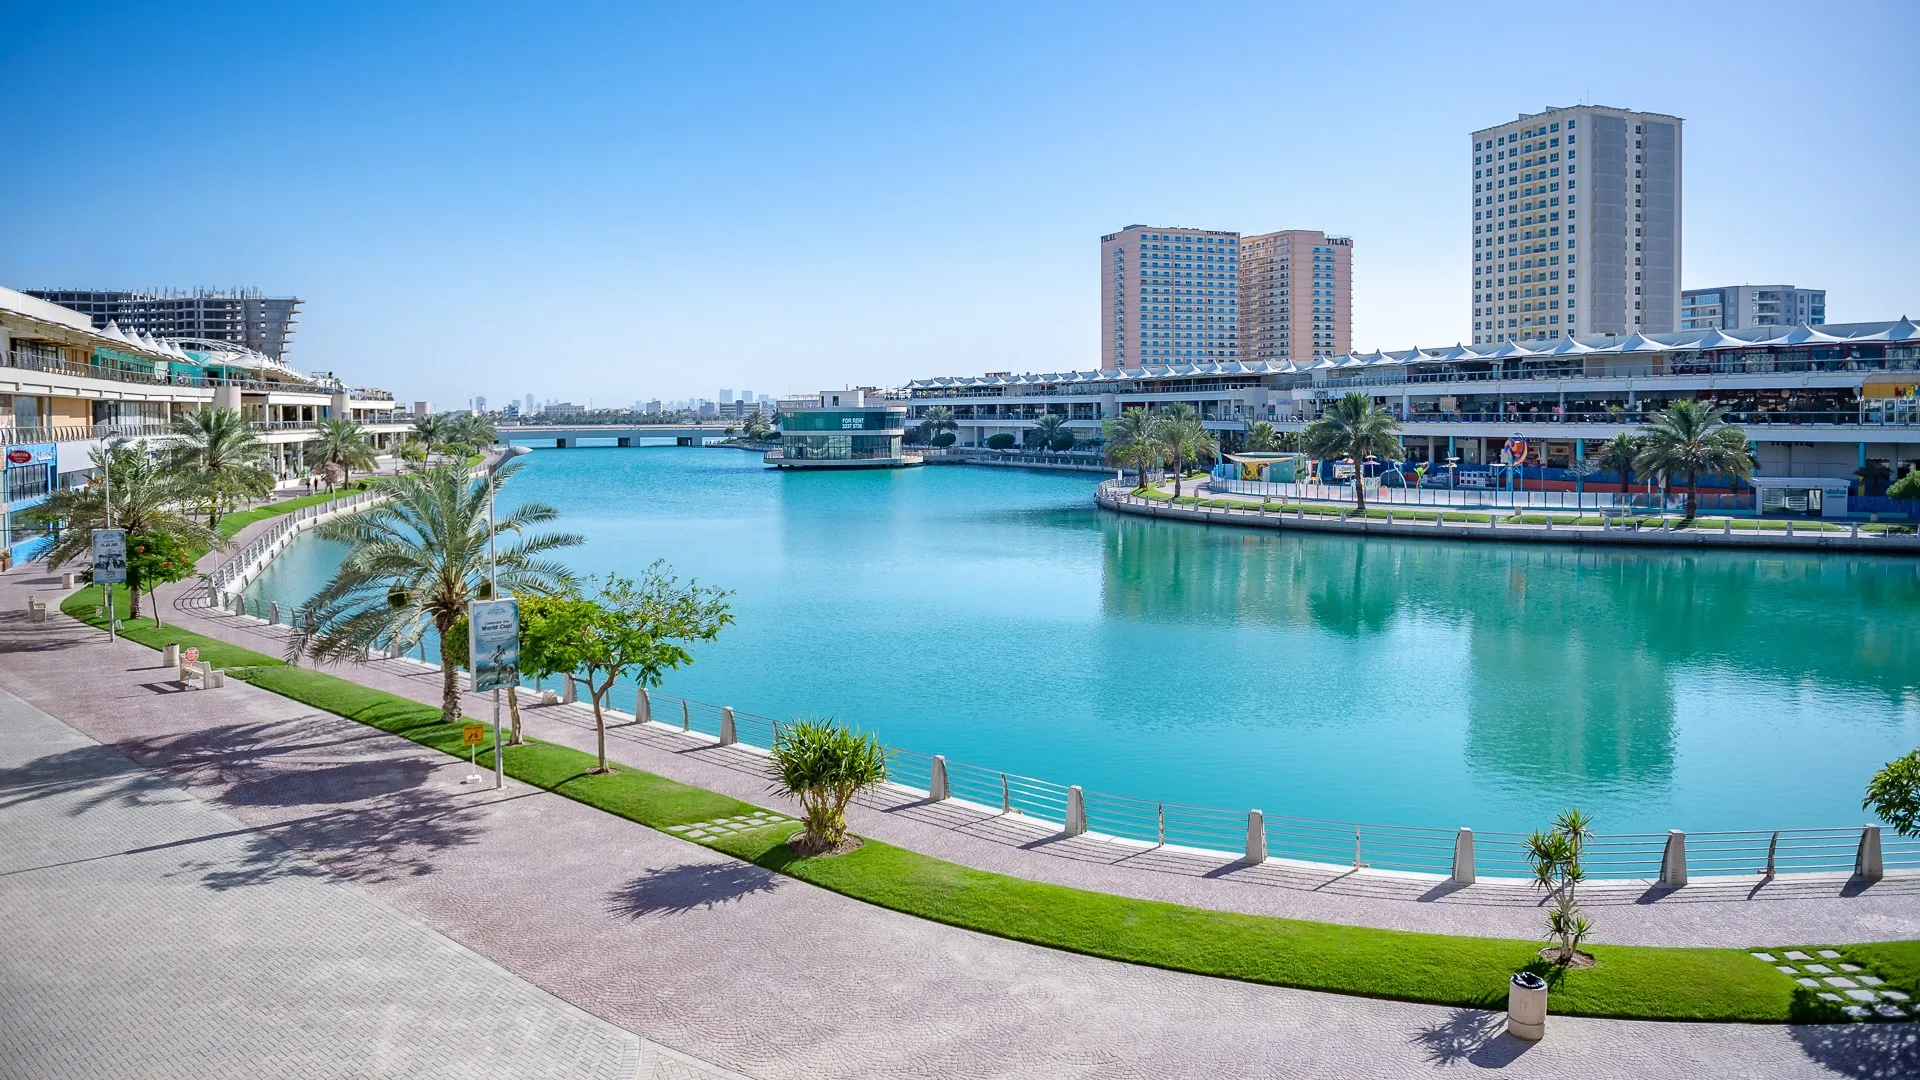 The Lagoons Bahrain in Bahrain, middle_east | Fragrance,Handbags,Shoes,Souvenirs,Accessories,Clothes,Gifts,Cosmetics - Country Helper